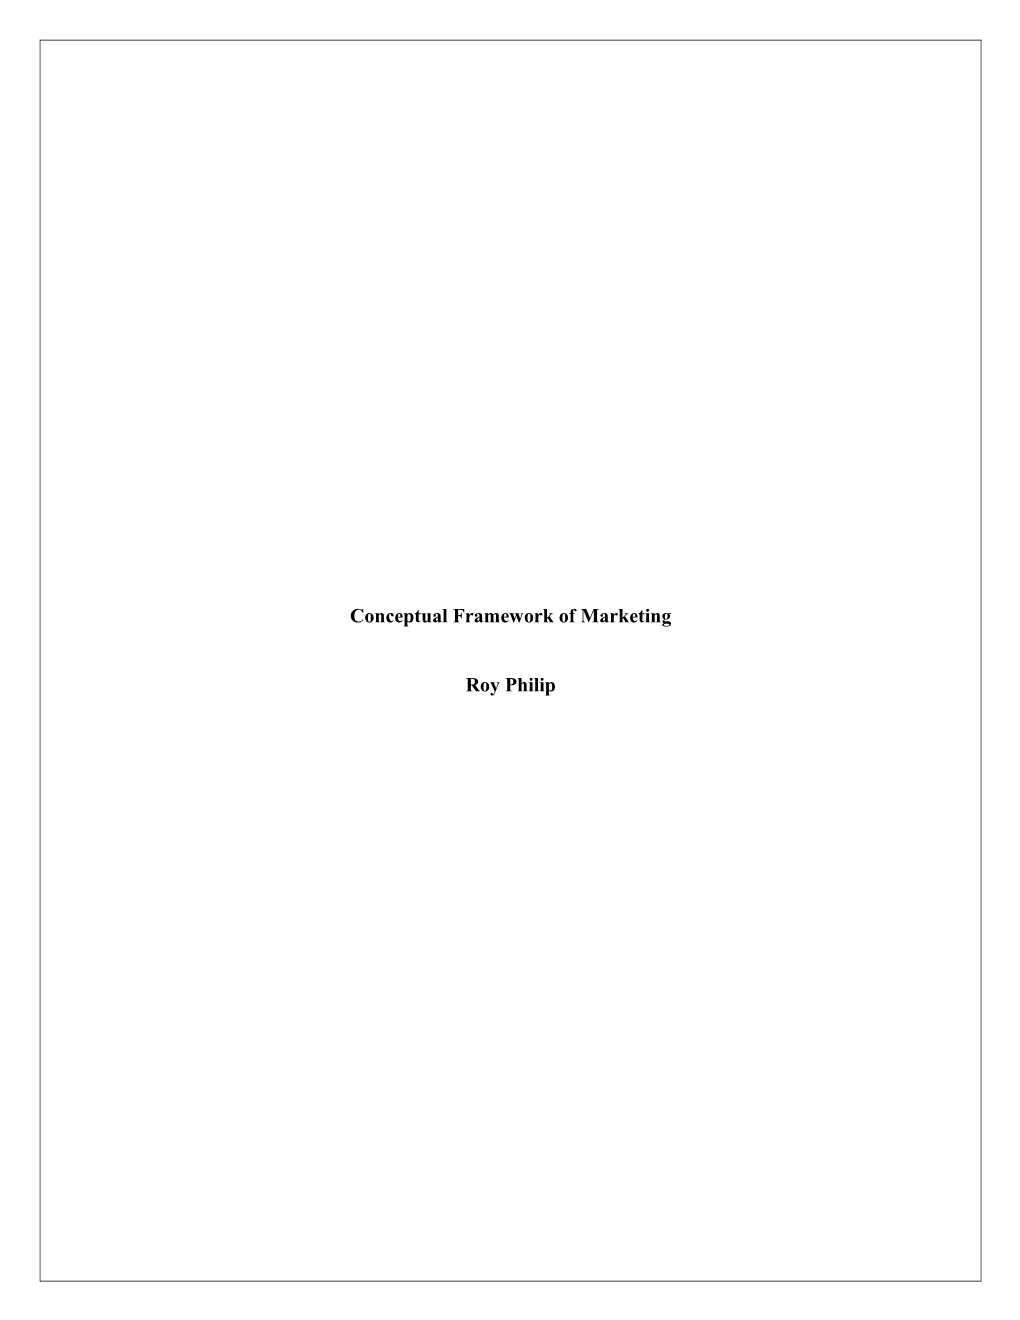 Conceptual Foundations of Marketing